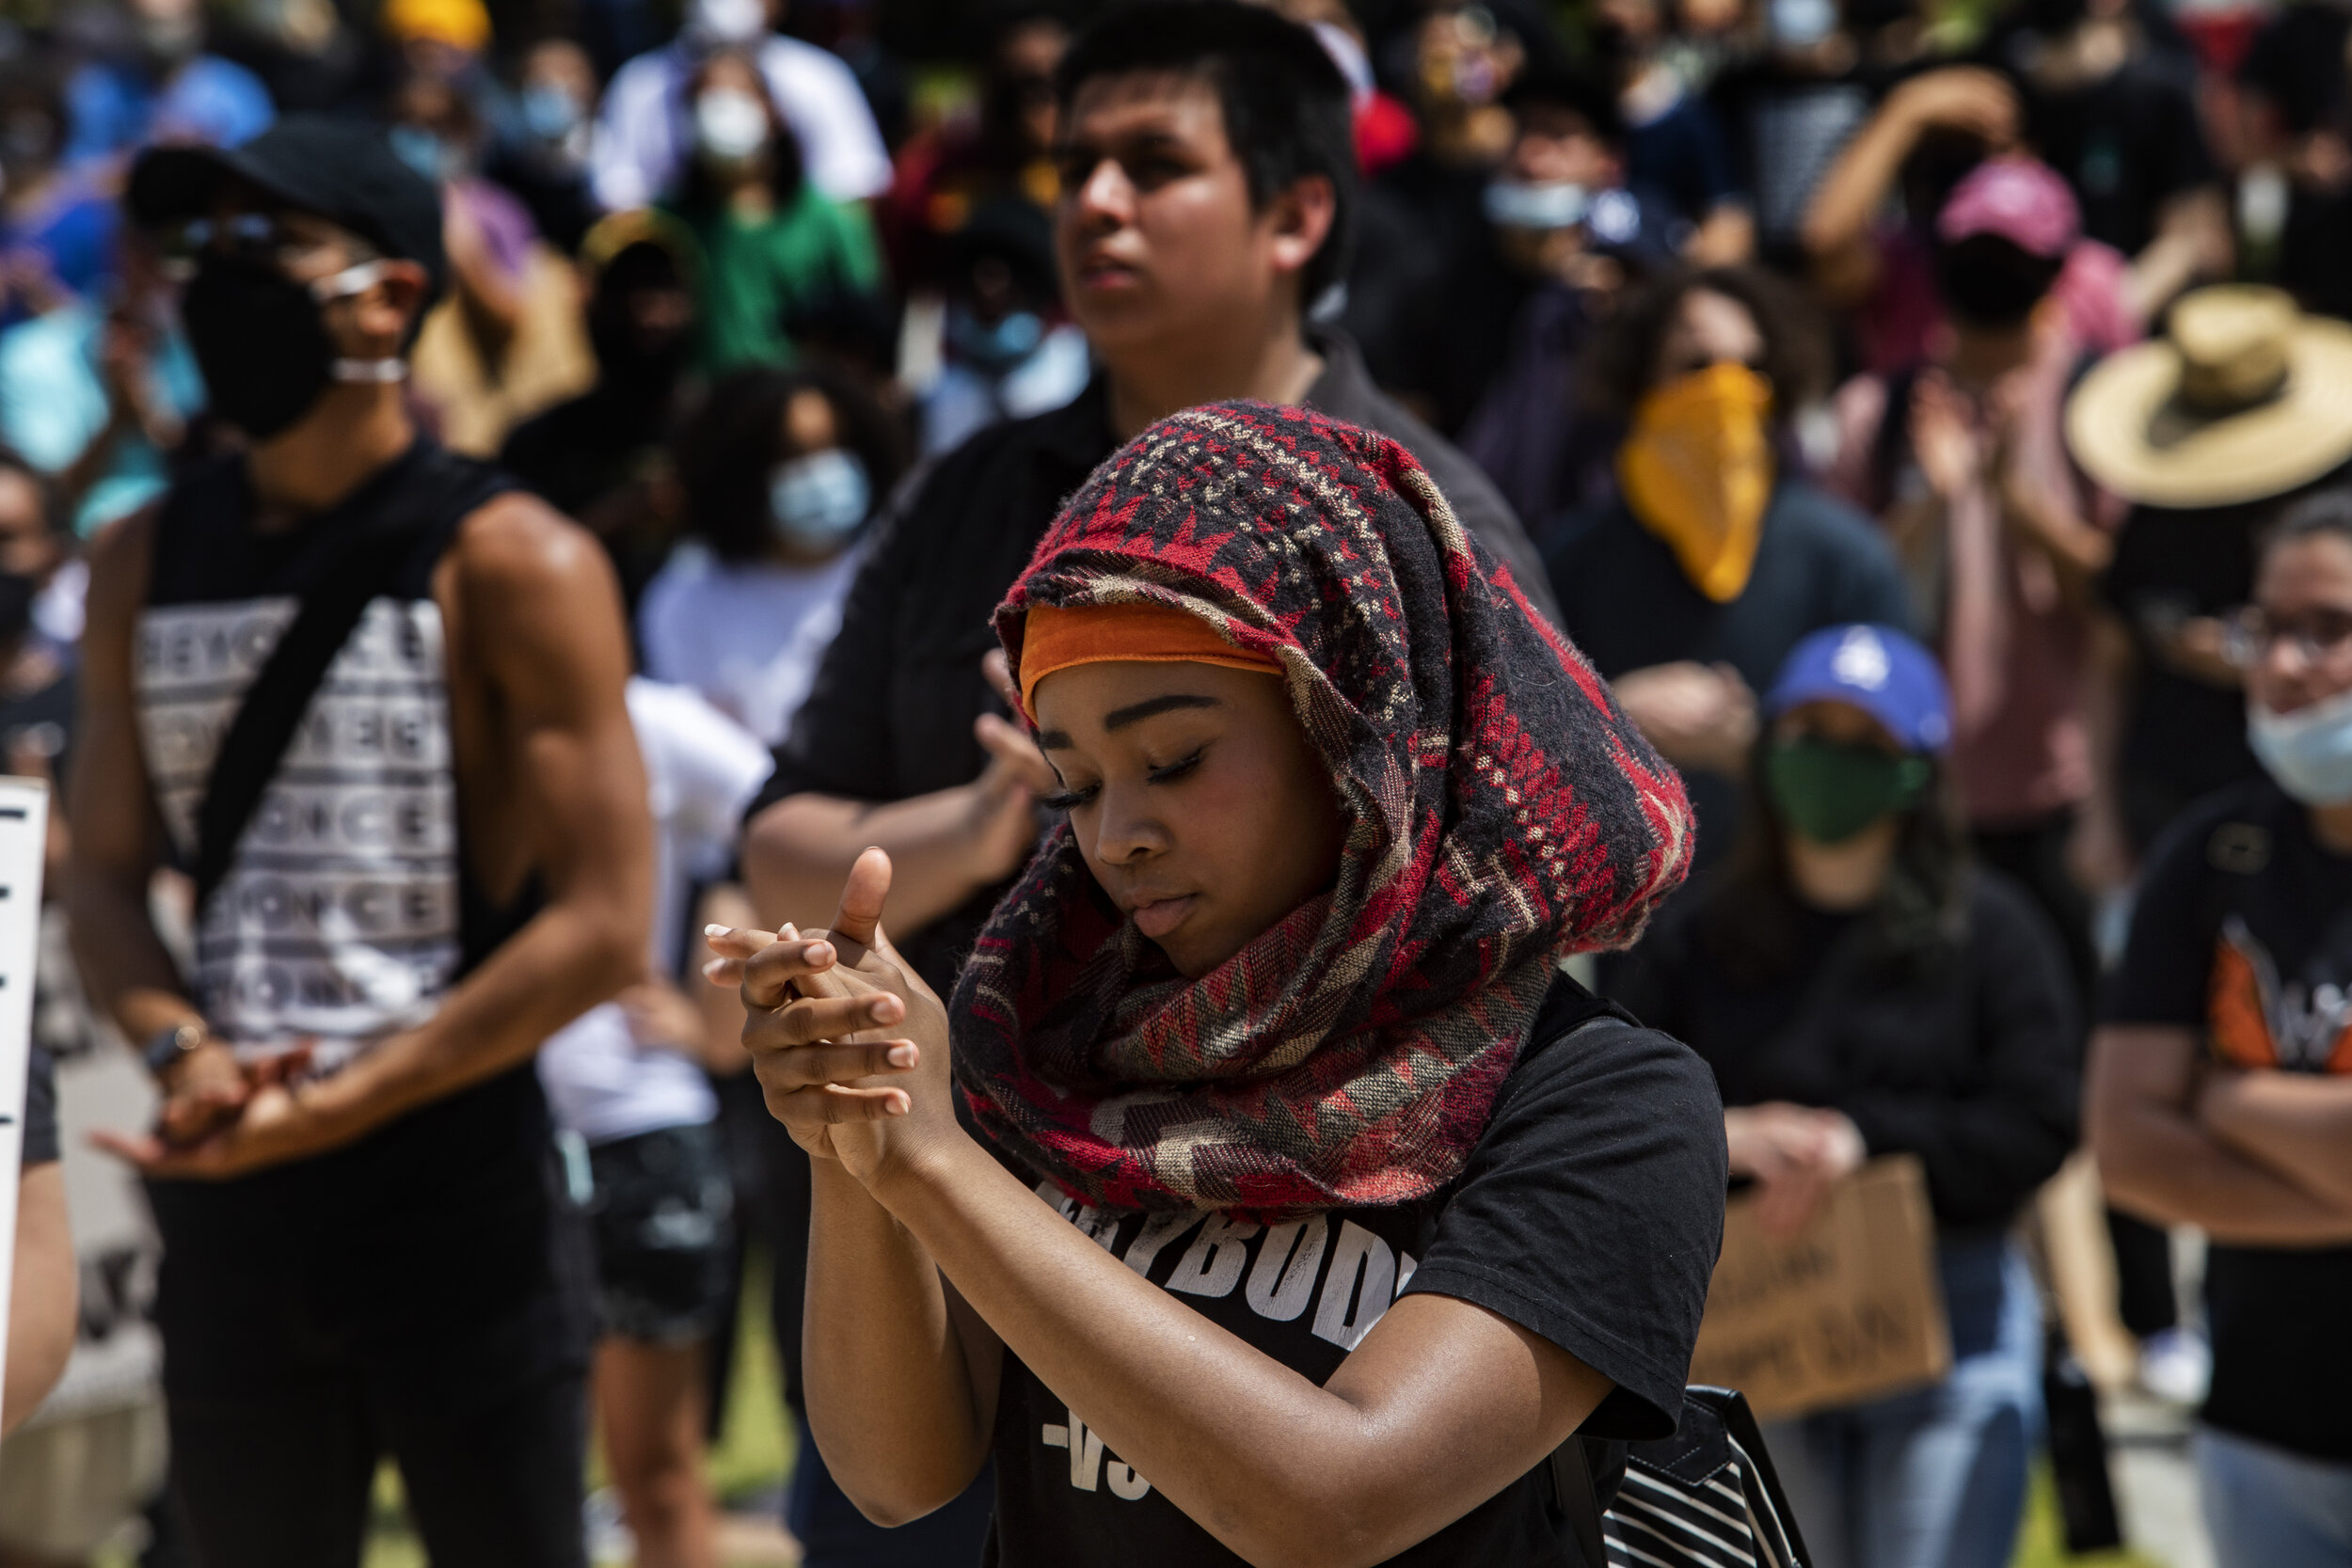  E'Layjiah Wooley protests at Cal State University Northridge  at an event organized by Northridge Black Lives Matter. 